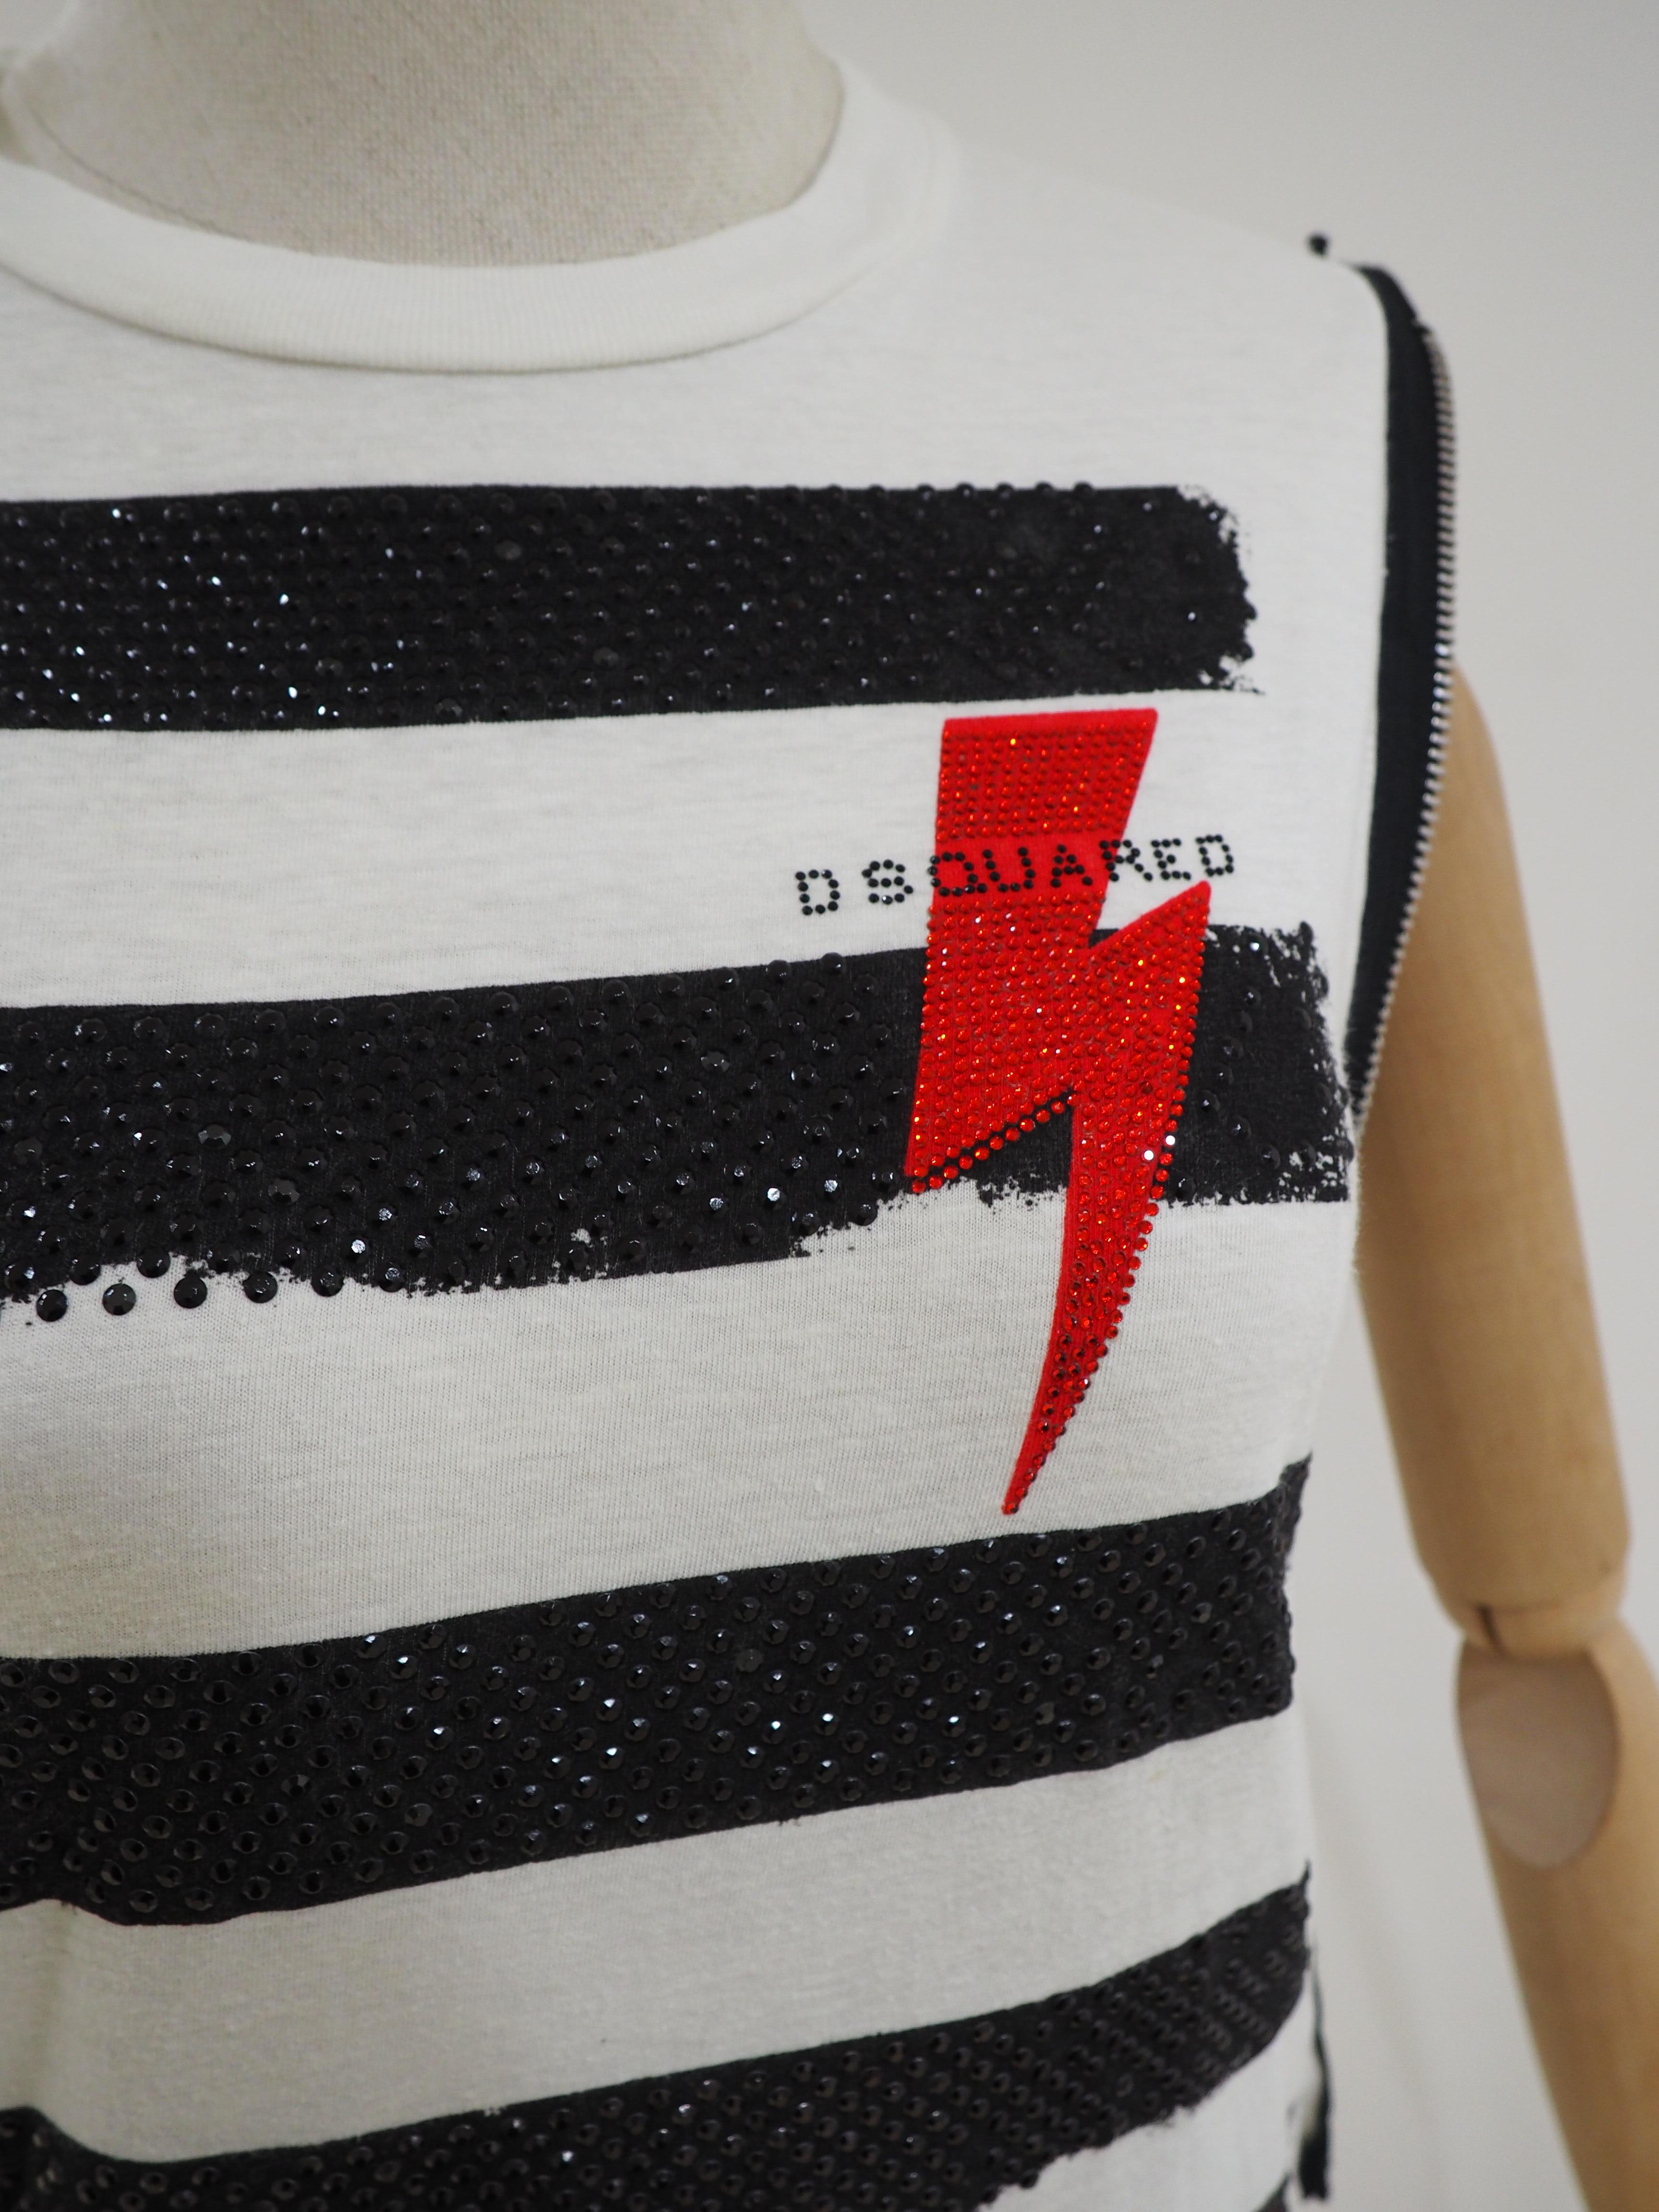 Dsquared black white zip top shirt For Sale 5